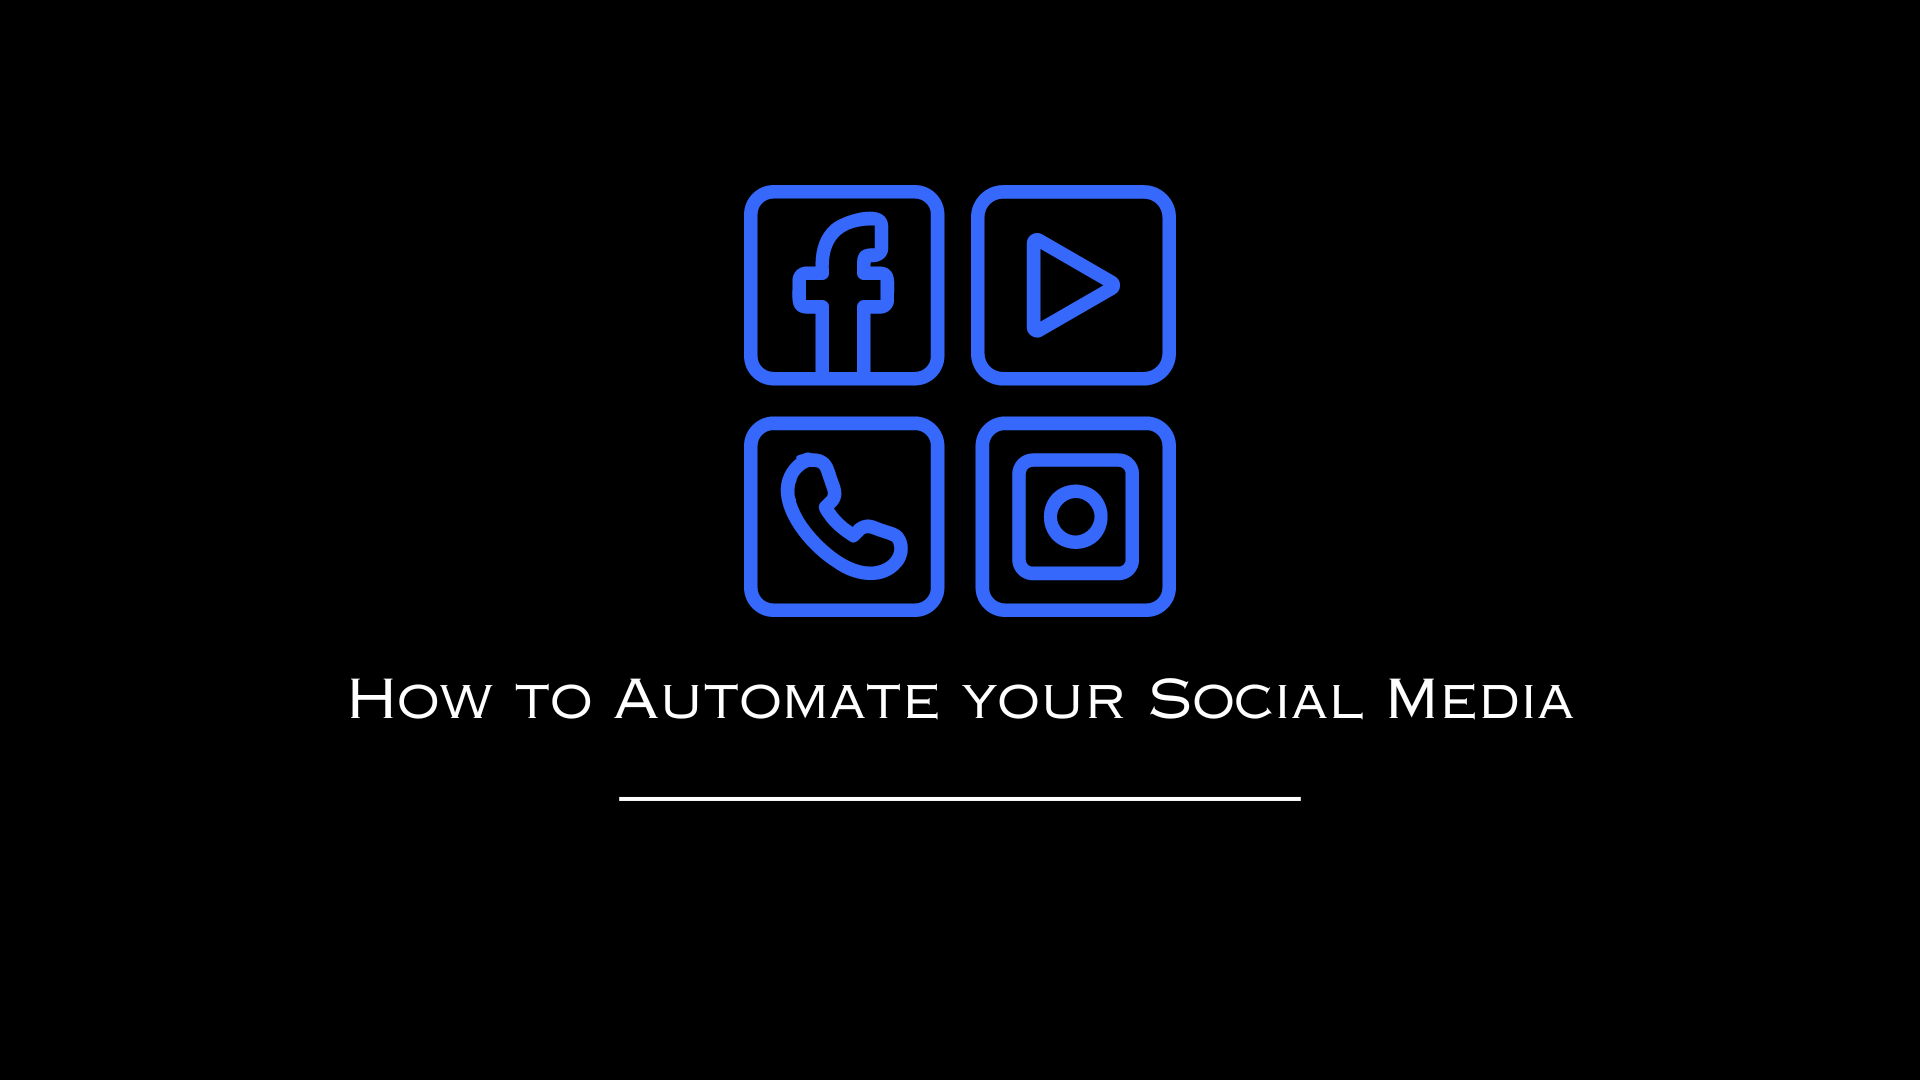 How to Automate Your Social Media